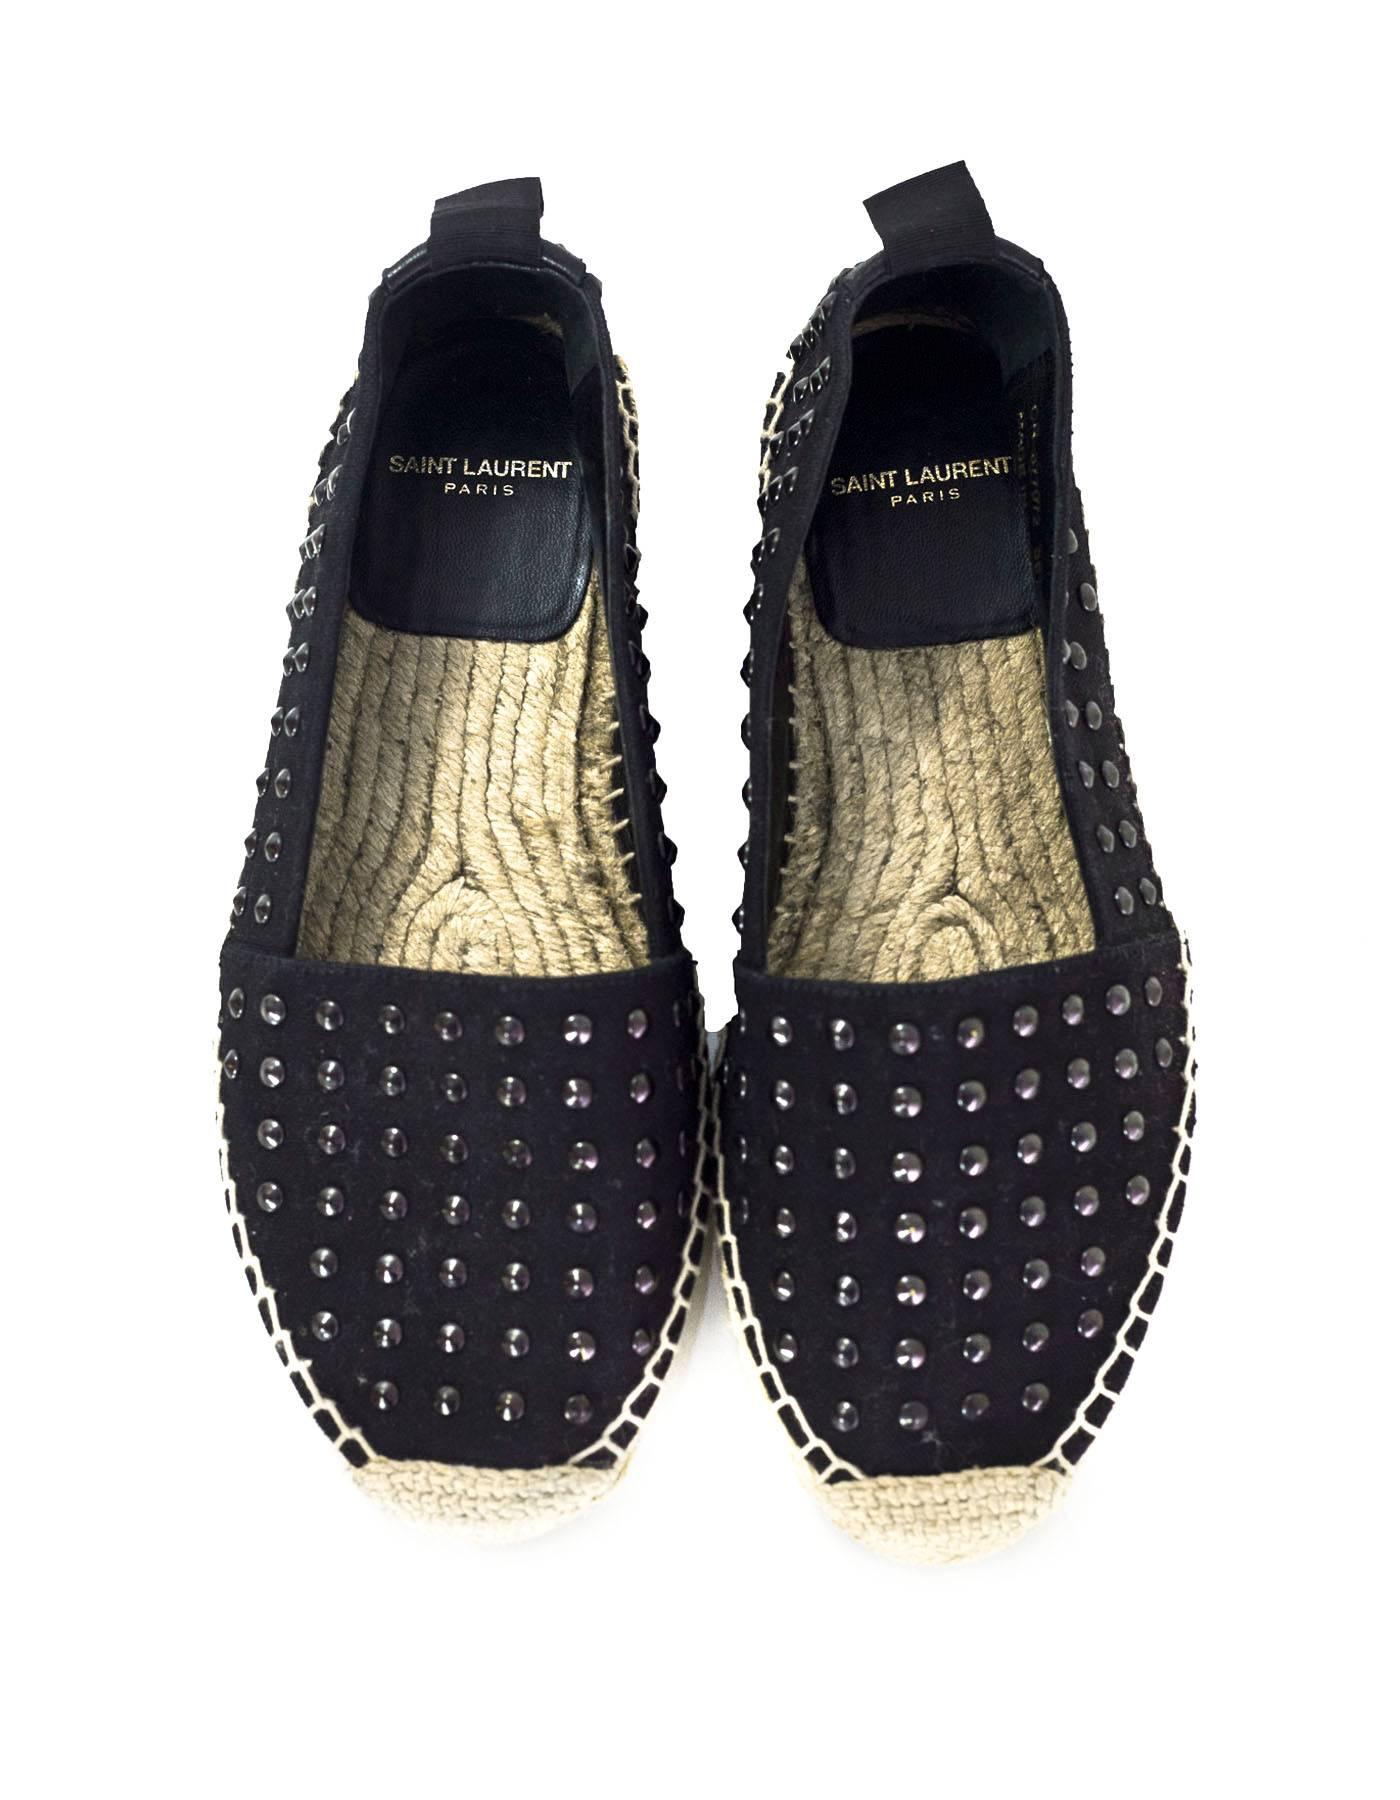 Saint Laurent Black Canvas Studded Espadrilles

Made In: Spain
Color: Black
Materials: Canvas and metal
Closure/Opening: Slide on
Sole Stamp: Saint Laurent Paris
Overall Condition: Excellent pre-owned condition with the exception of wear/soiling